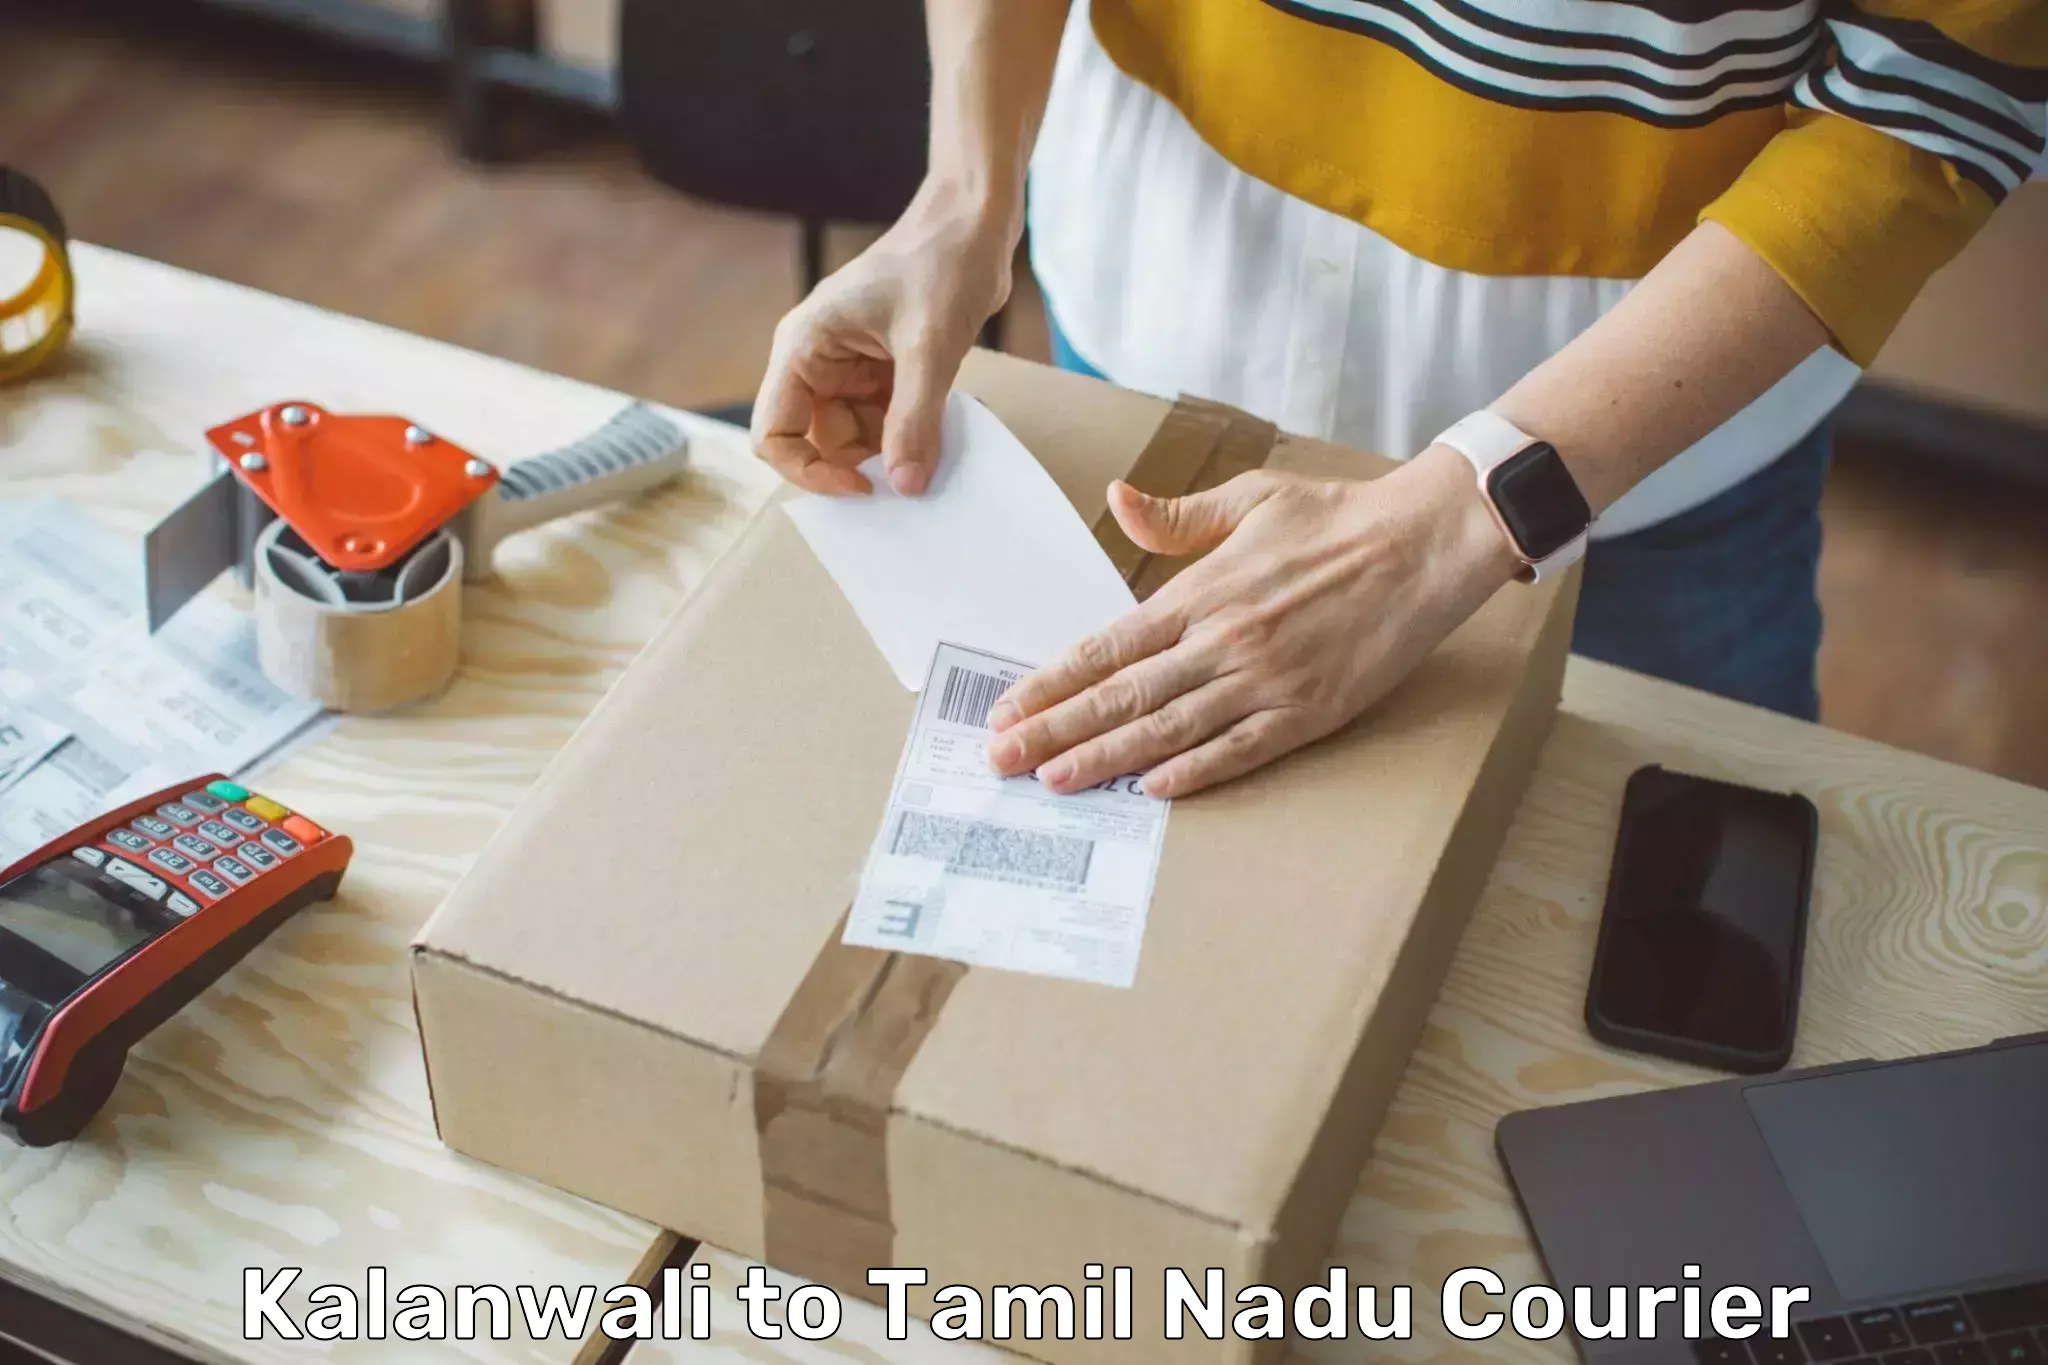 Online courier booking Kalanwali to Sriperumbudur